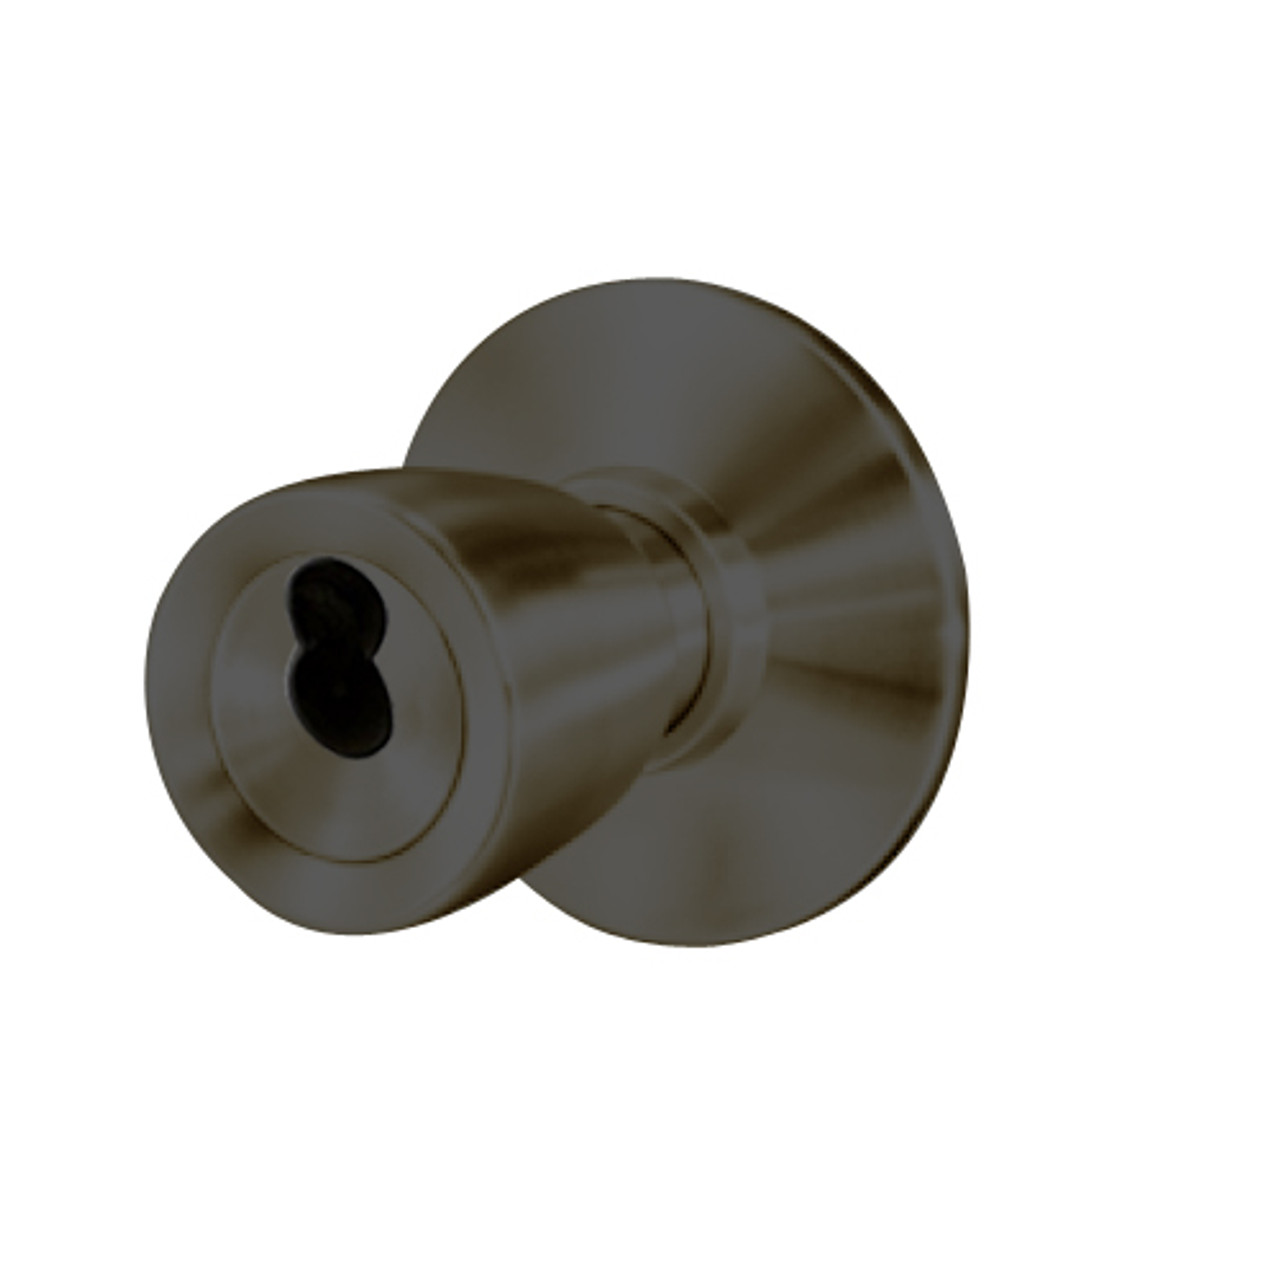 8K37S6DSTK613 Best 8K Series Communicating Heavy Duty Cylindrical Knob Locks with Tulip Style in Oil Rubbed Bronze